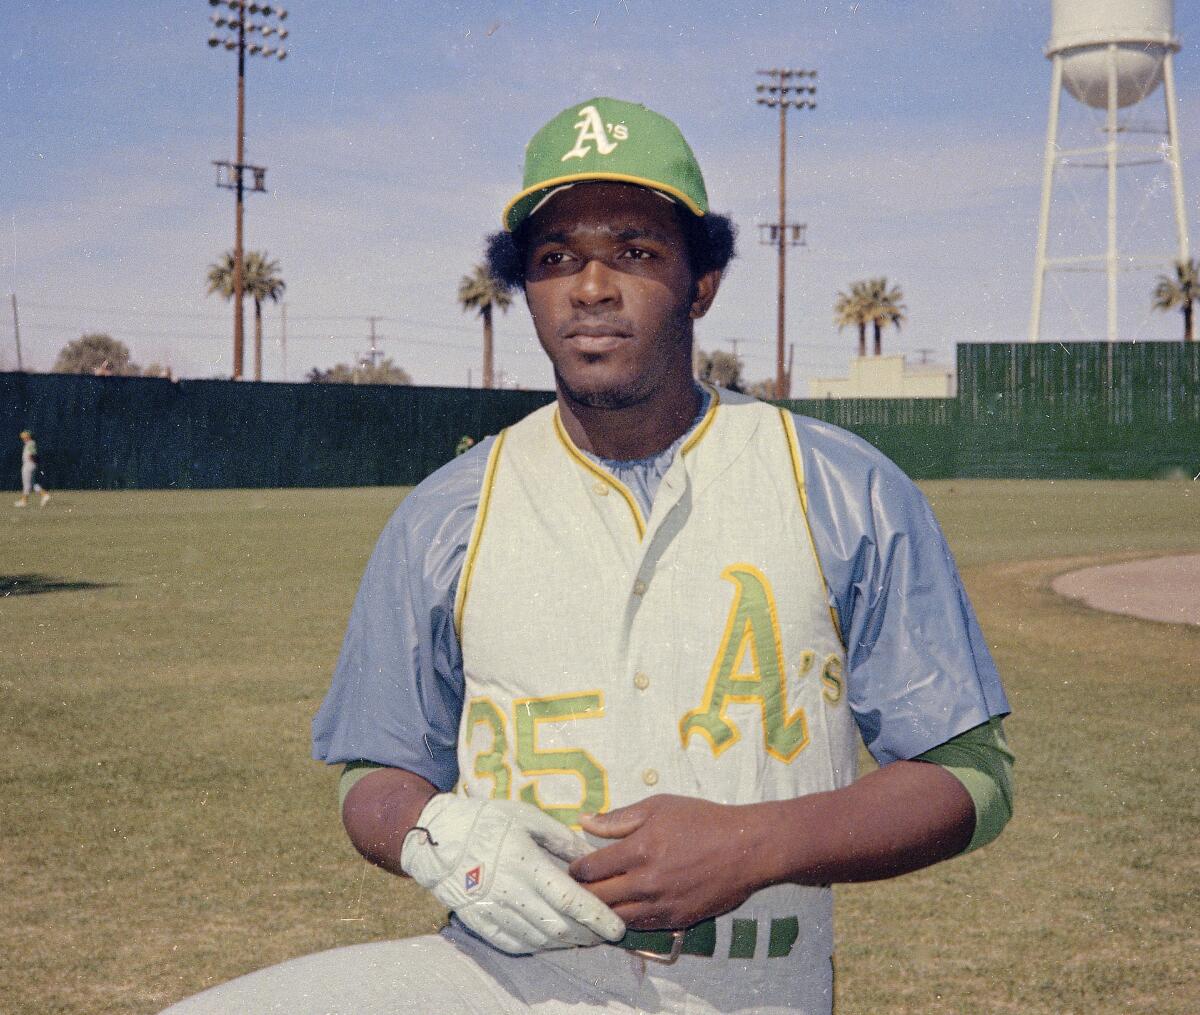 Oakland A's Vida Blue poses for a photo in 1976.